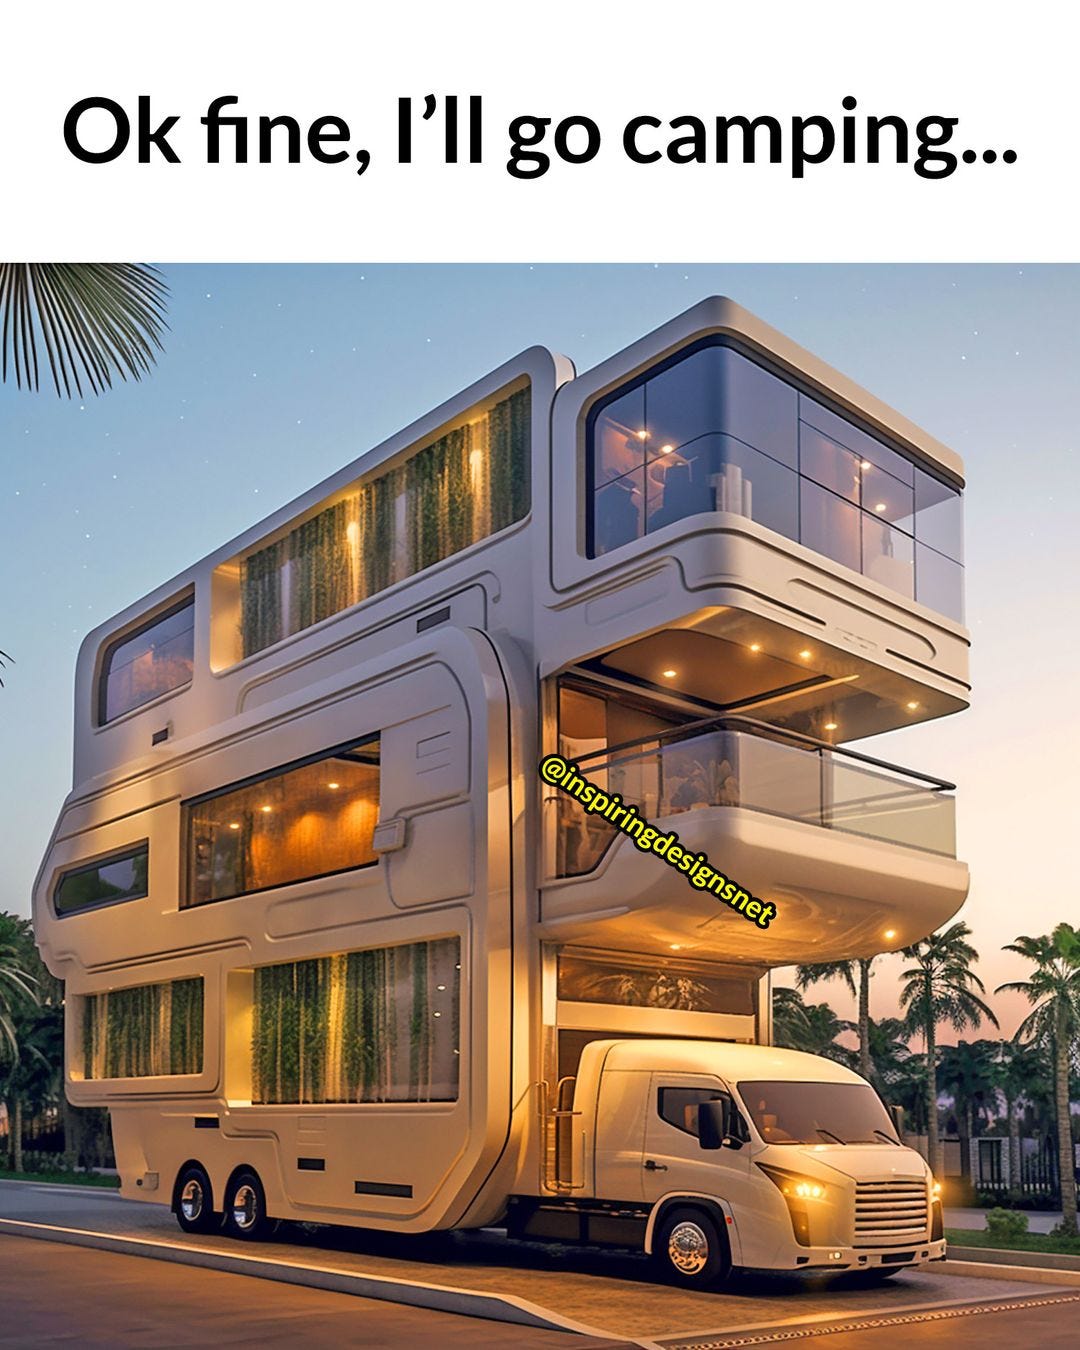 May be an image of campsite and text